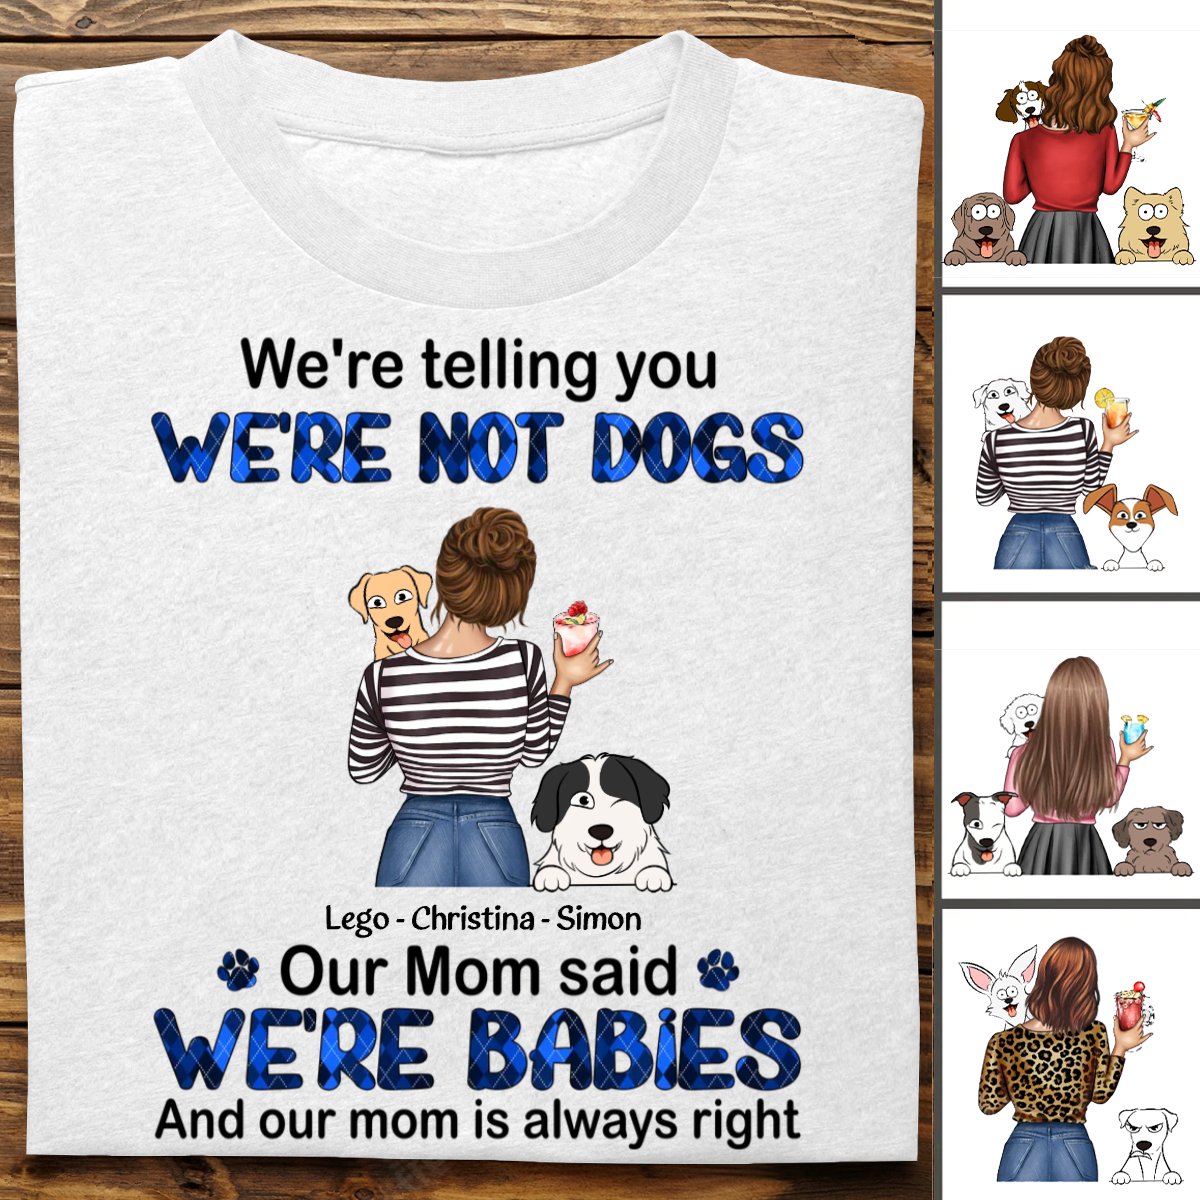 Dog Lovers - We're Babies And Our Mom Is Always Right - Personalized T - shirt (LH) - The Next Custom Gift